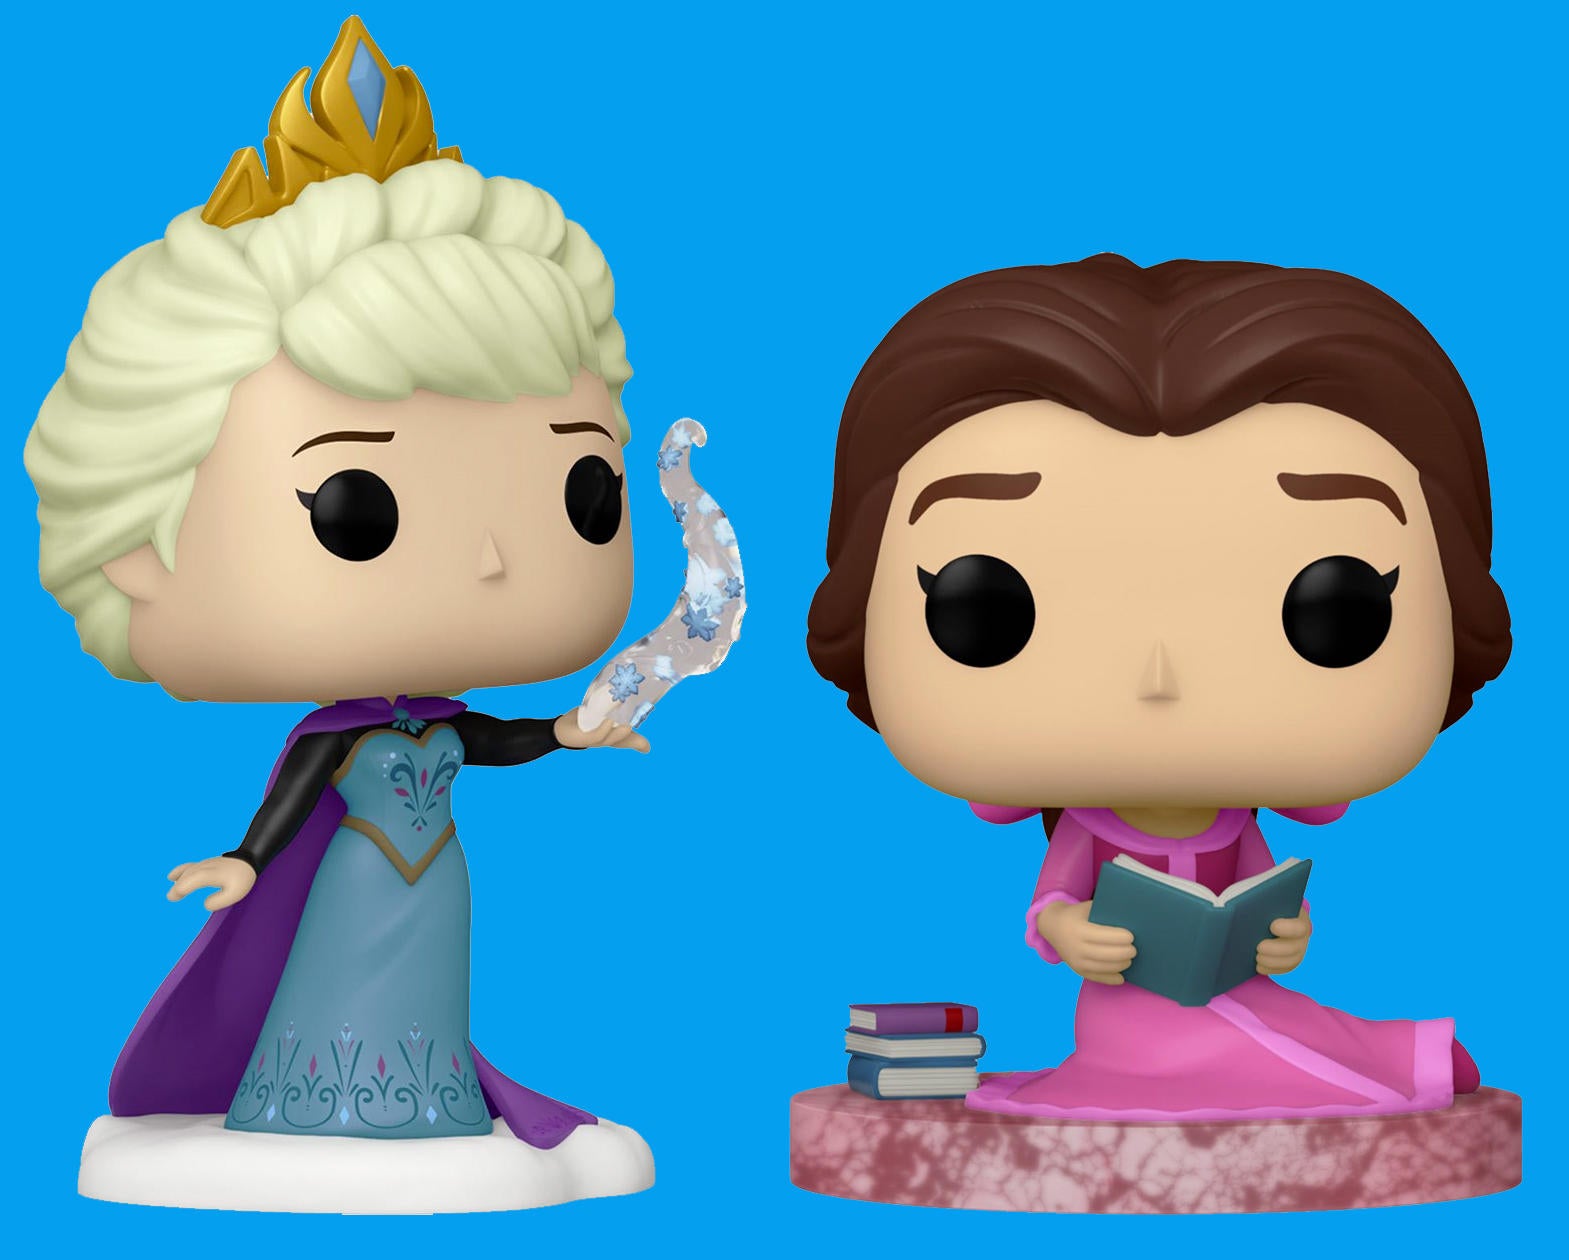 Funko Disney Ultimate Princess Line Adds New Pops And a Castle